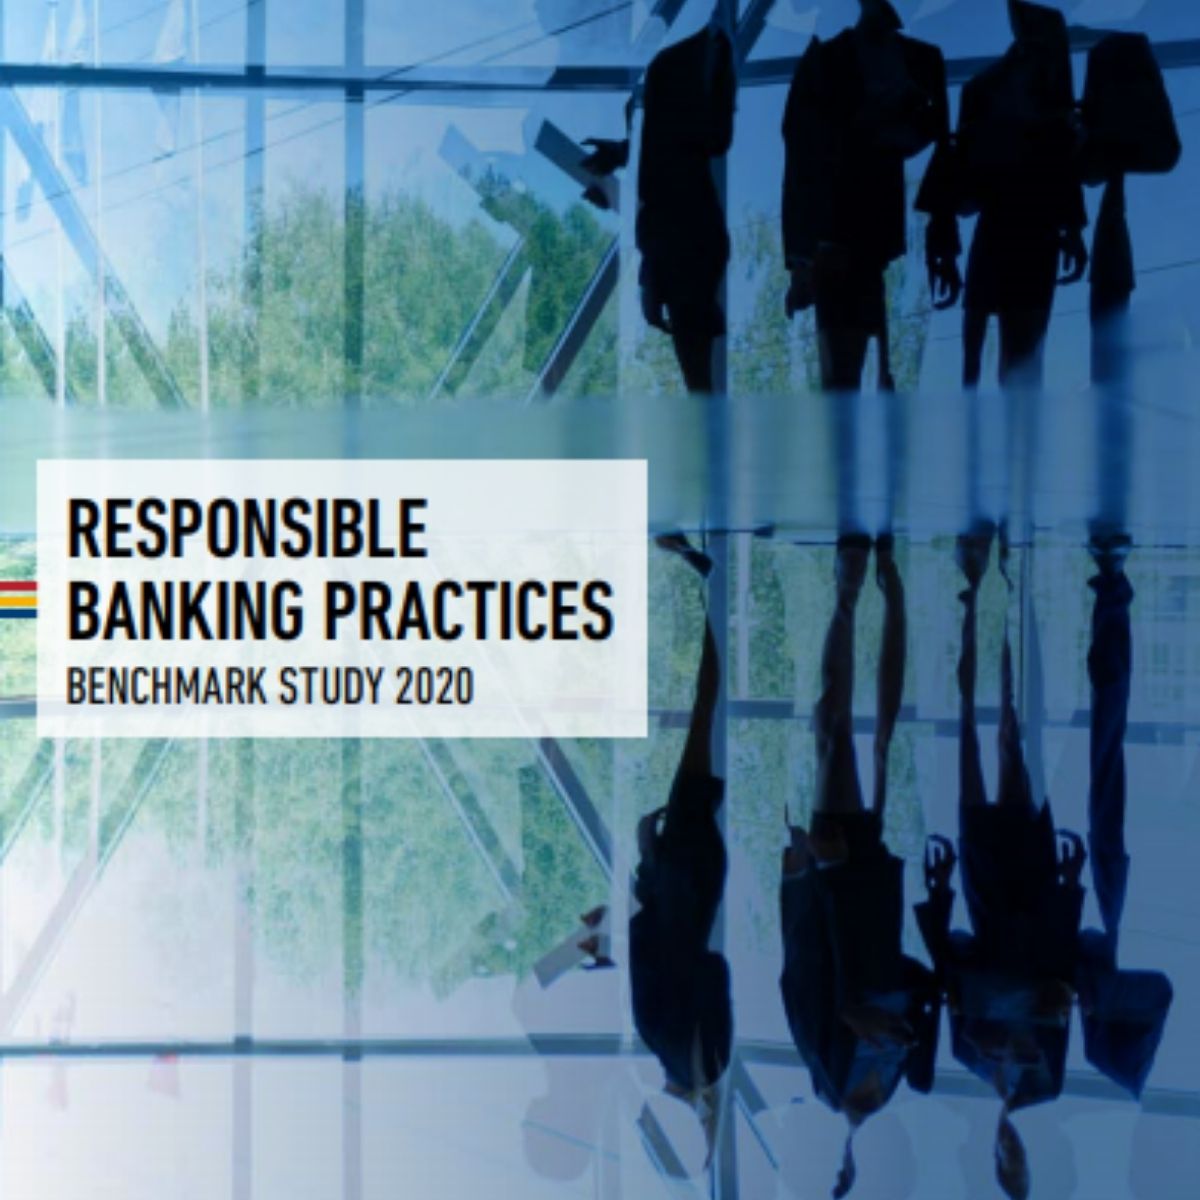 Responsible Banking practices: Benchmark study 2020